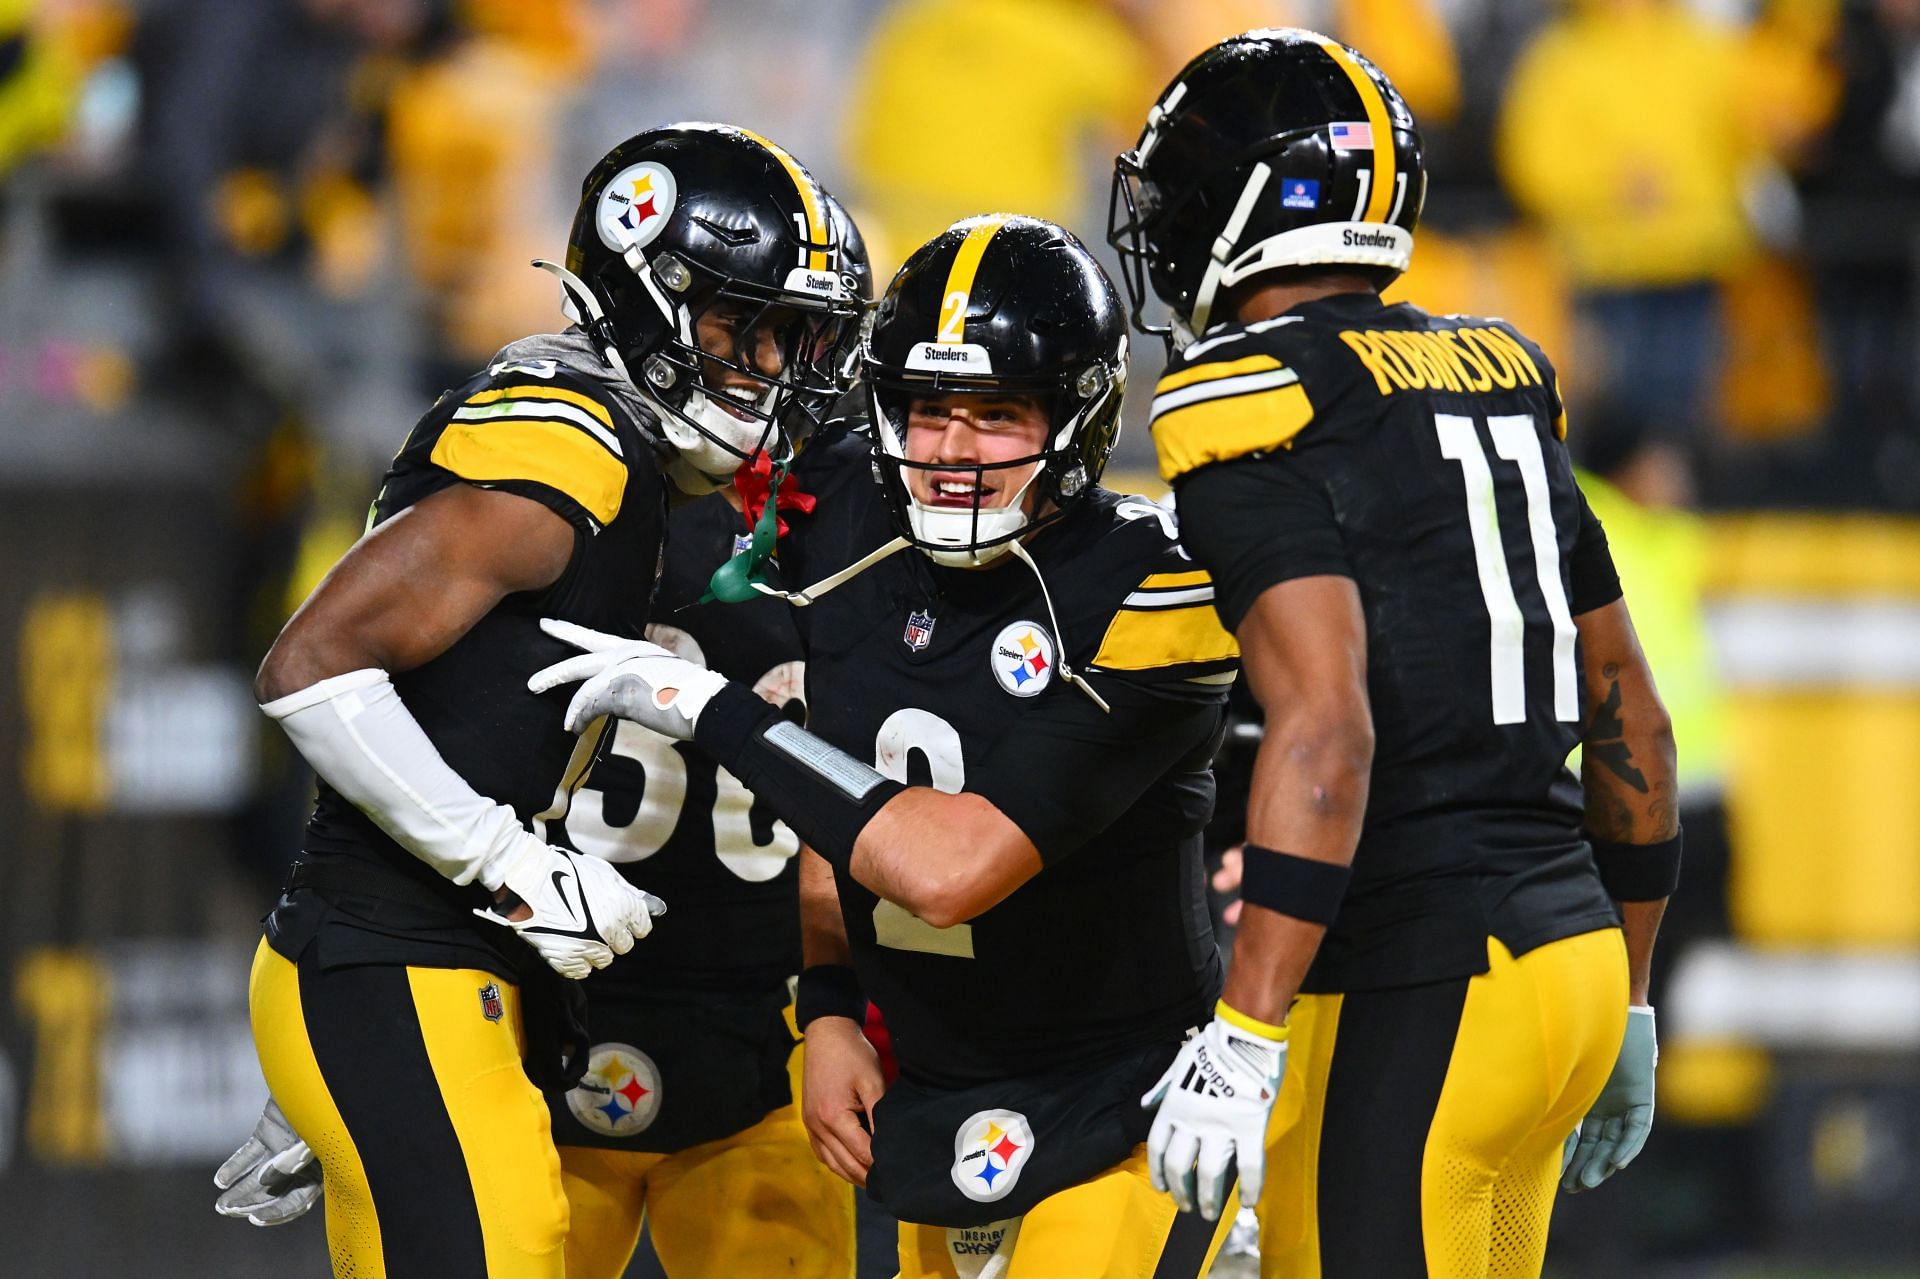 Can the Steelers make the playoffs?